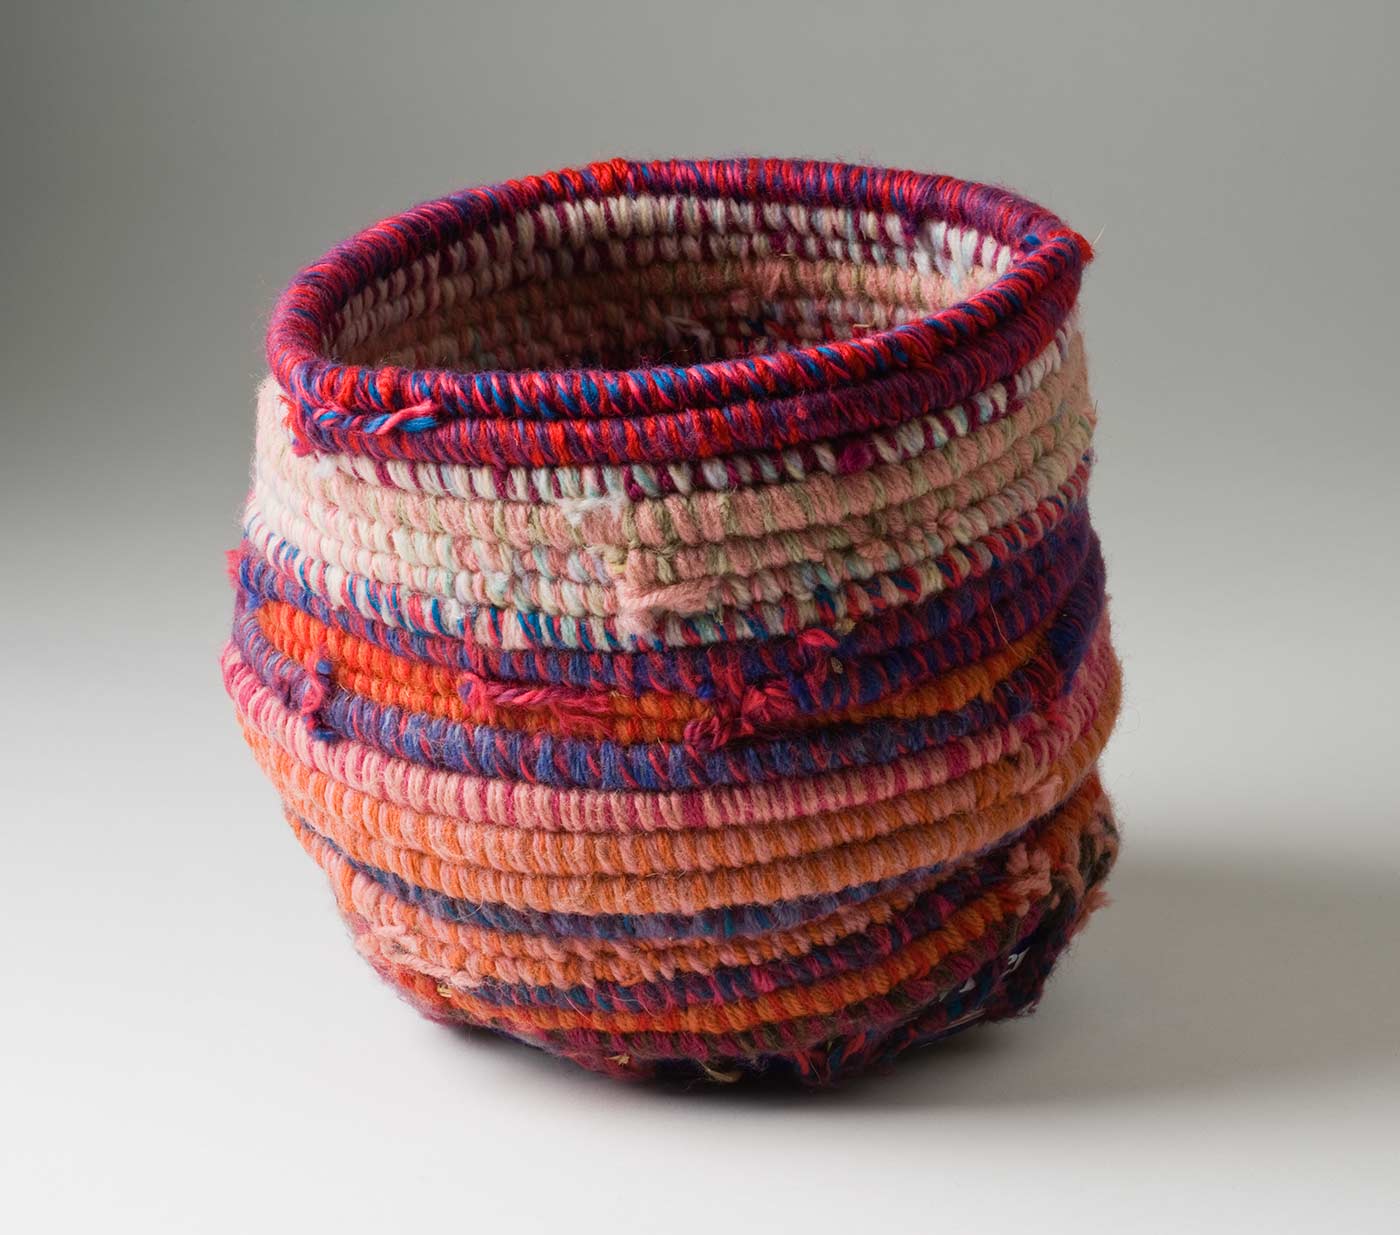 A cylindrical coiled multicoloured yarn and plant fibre basket with a metal base. The light and dark pink coiled yarn is mixed with colours of blue, orange, red and purple. The base of the basket is a blue and white coloured metal tin with burn marks to the bottom. Yarn is used to attach the base to the top section through holes that have been punched in the tin. - click to view larger image